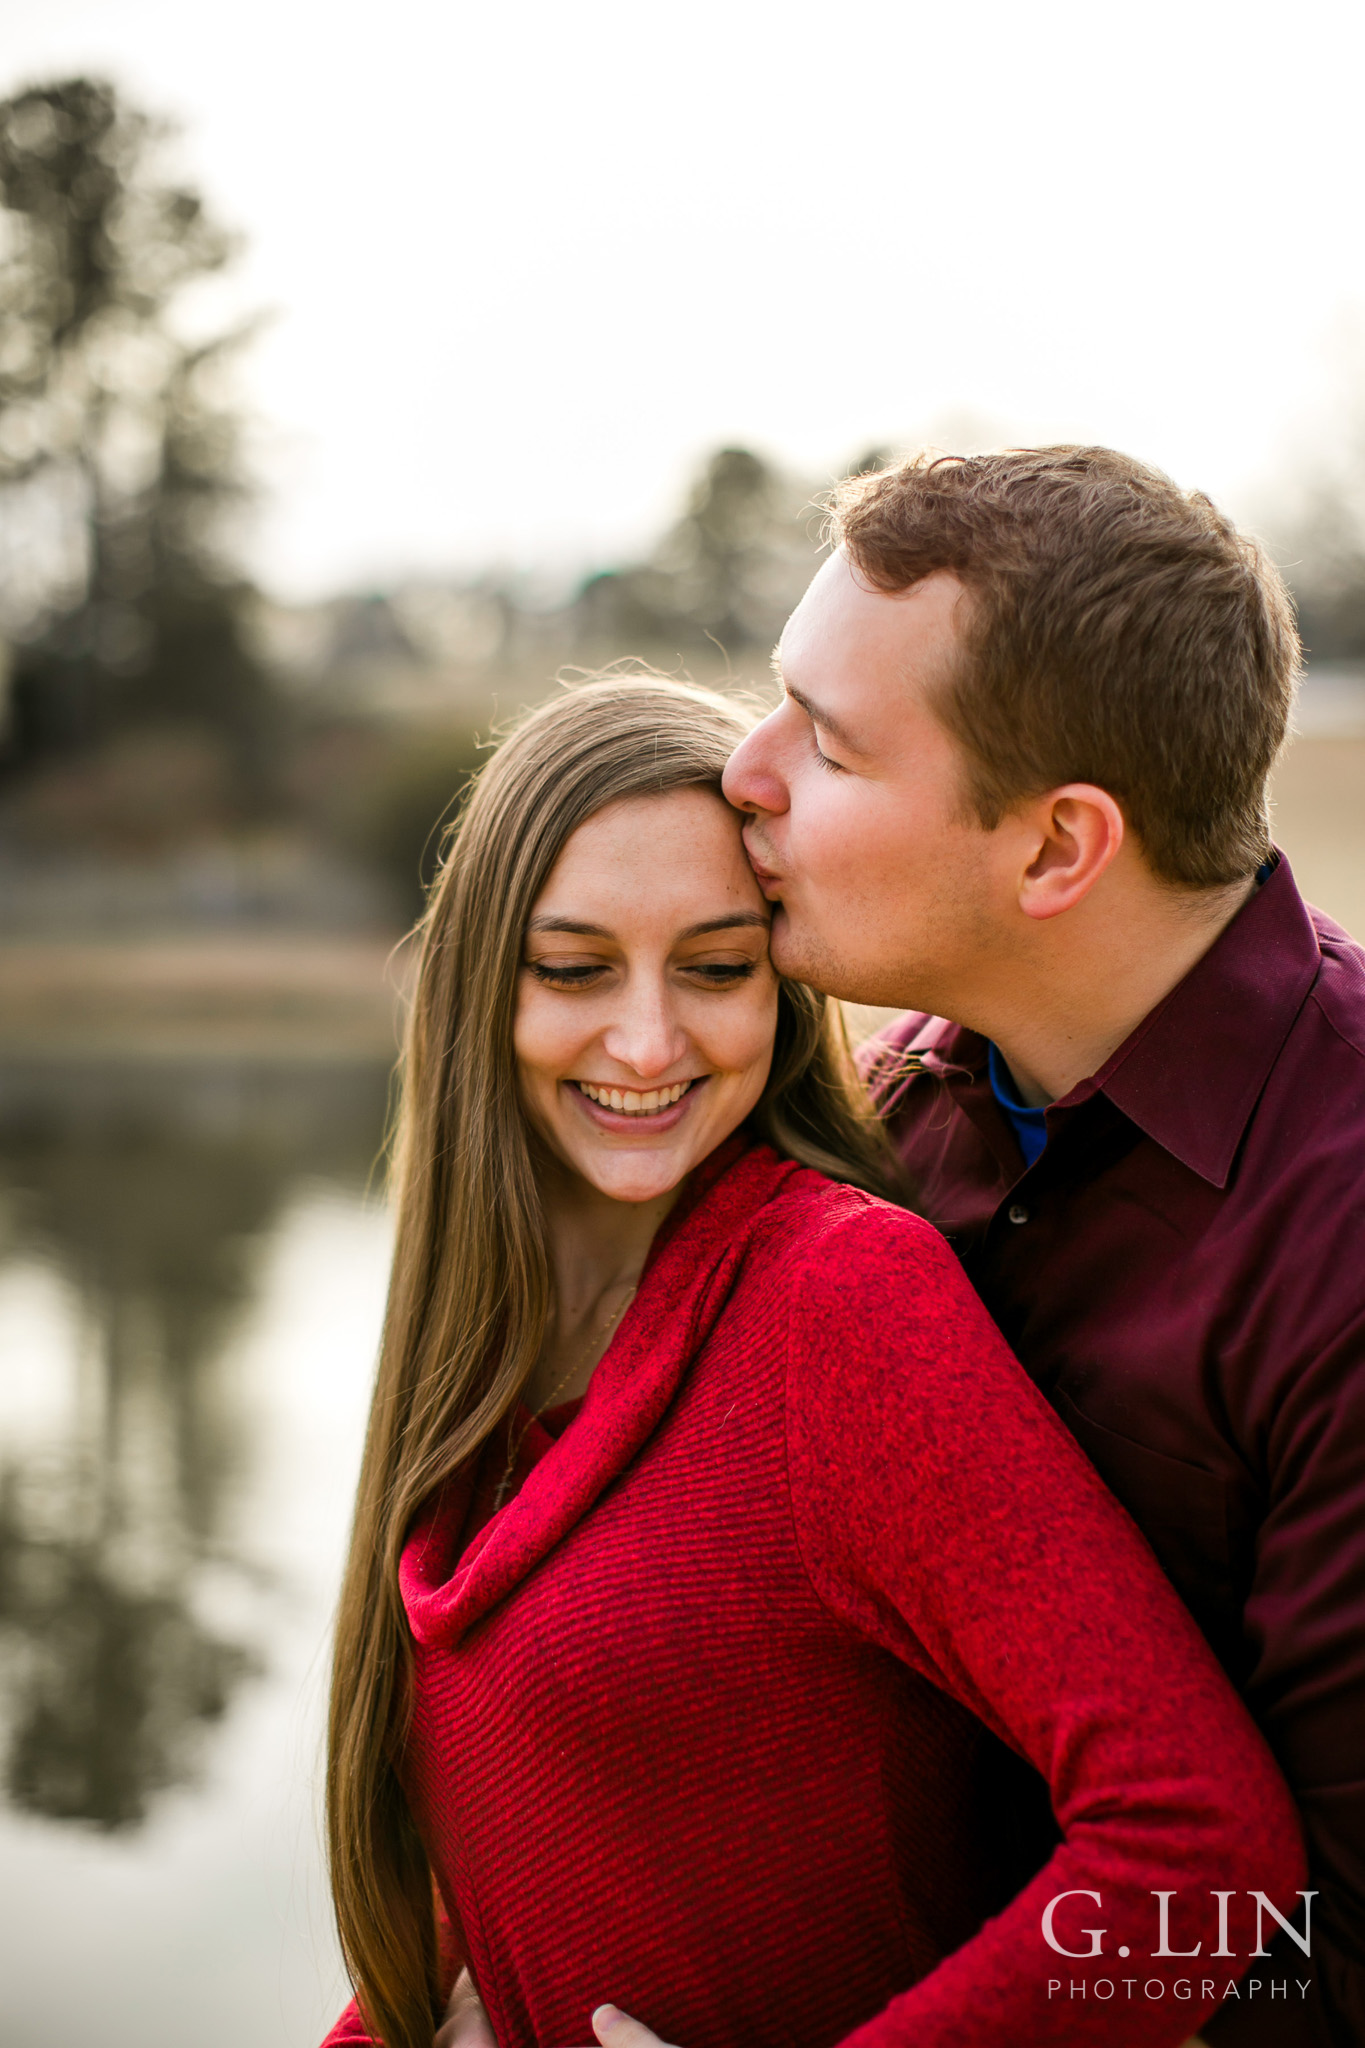 Winter Engagement Photo Outside | Raleigh Engagement Photographer | By G. Lin Photography